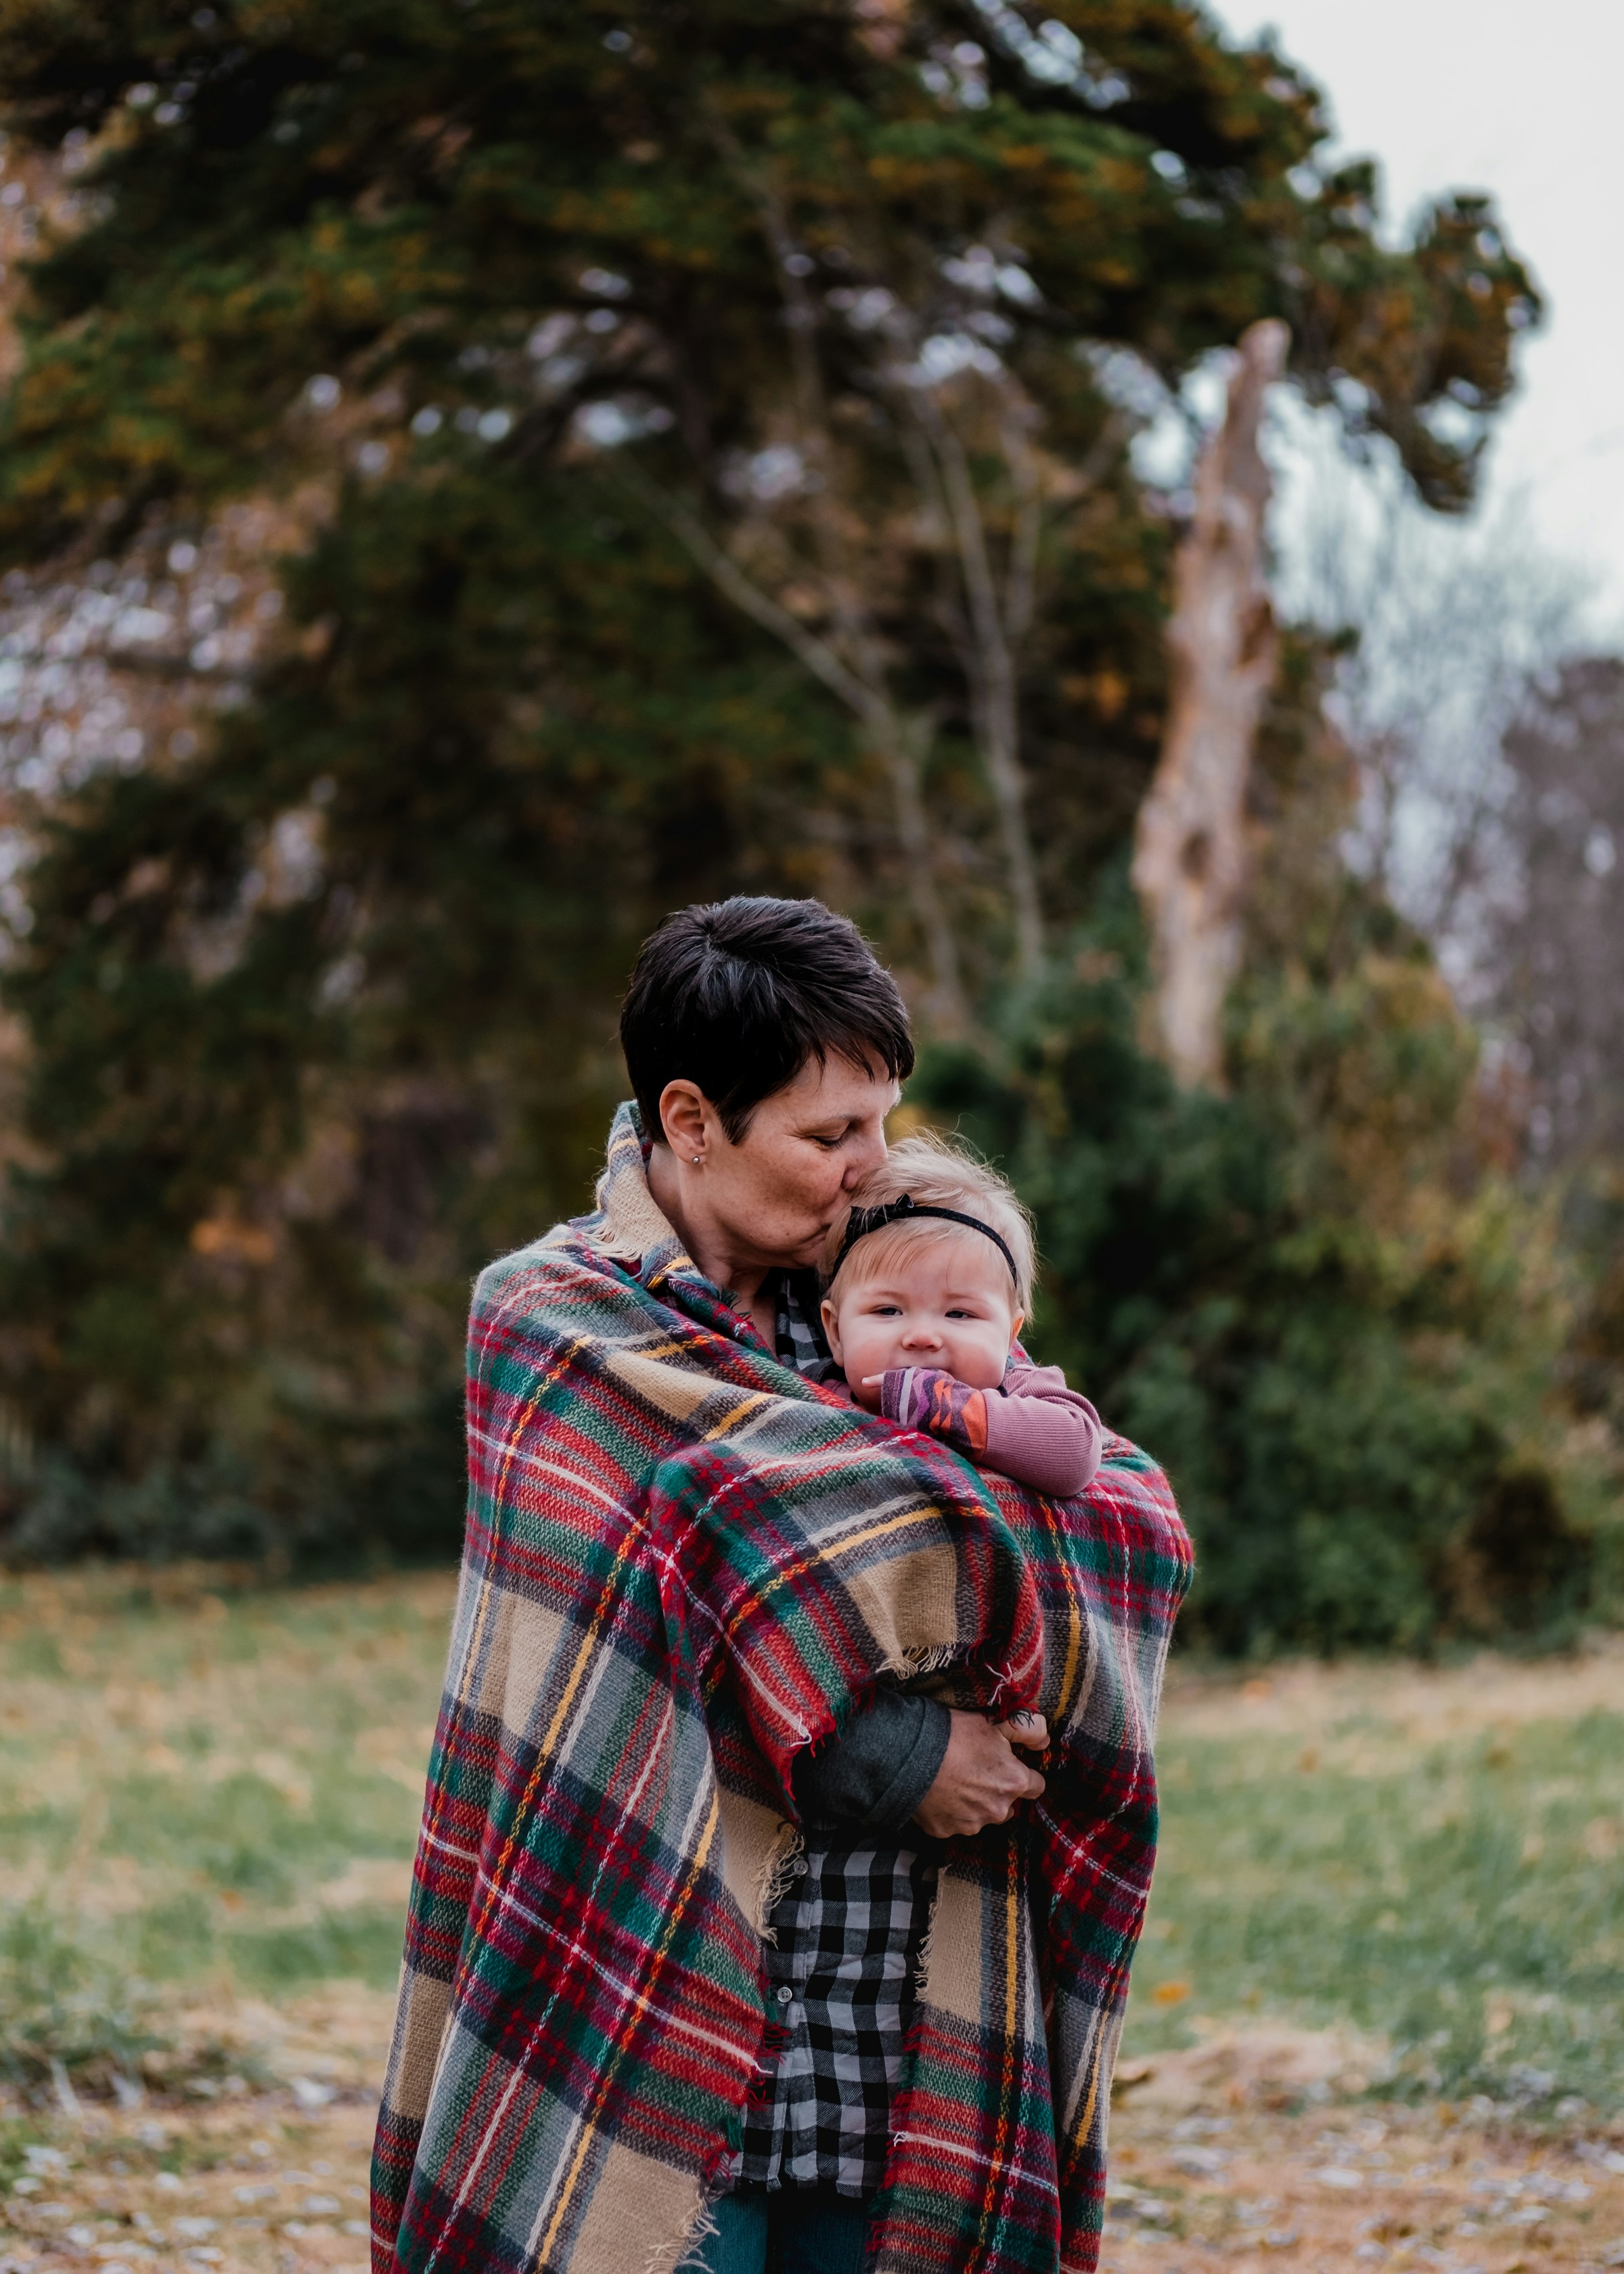 A grandmother carrying her granddaughter | Source: Unsplash